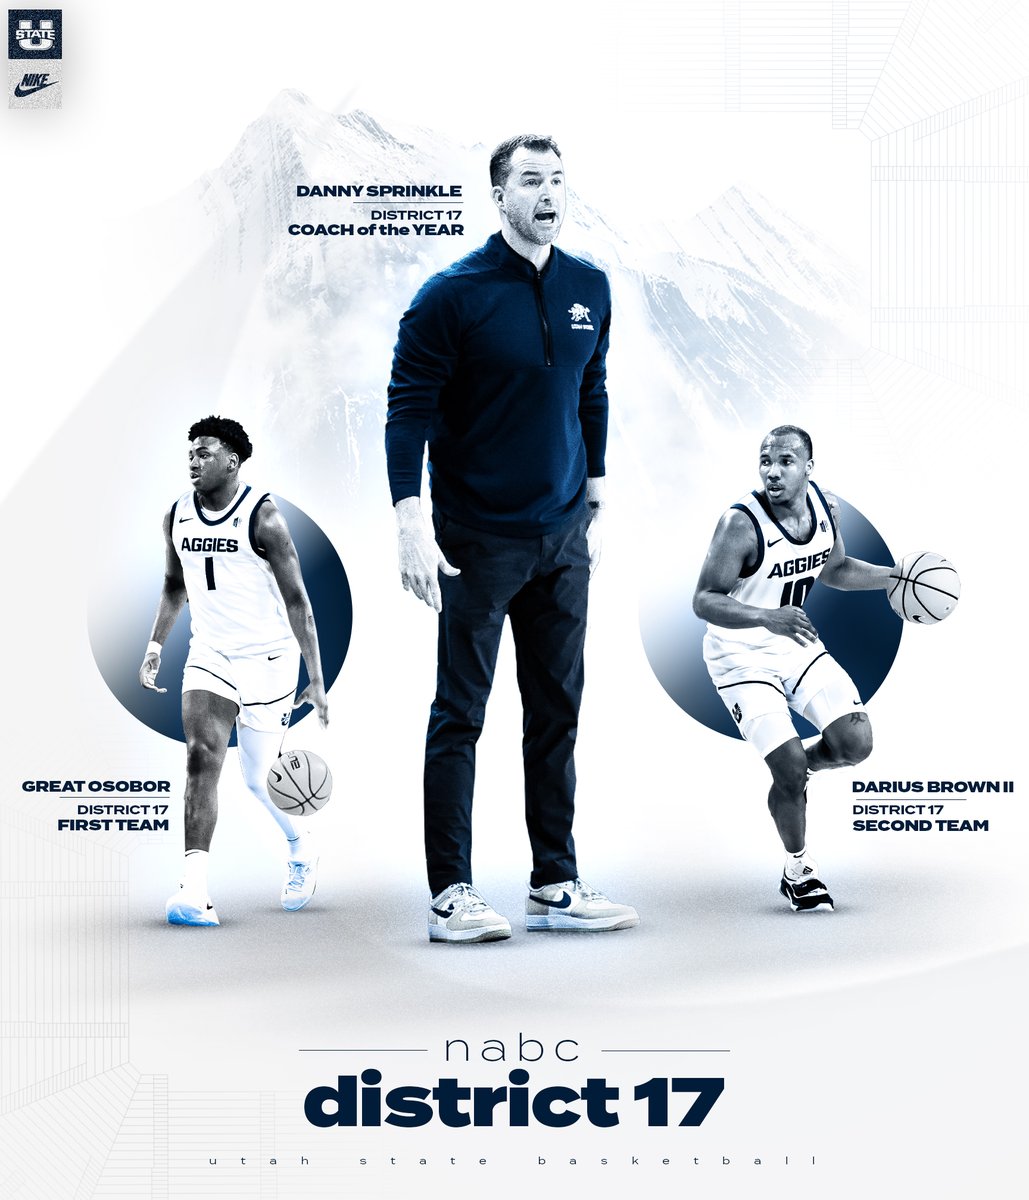 𝐓𝐡𝐞 𝐀𝐜𝐜𝐨𝐥𝐚𝐝𝐞𝐬 𝐤𝐞𝐞𝐩 𝐫𝐨𝐥𝐥𝐢𝐧𝐠 𝐢𝐧! ➡️ @USUCoachSprink District 17 Coach of the Year ➡️ @GreatOsobor District 17 First Team ➡️ @dariusbrownii District 17 Second Team 🔗 bit.ly/4amR5QX #AggiesAllTheWay